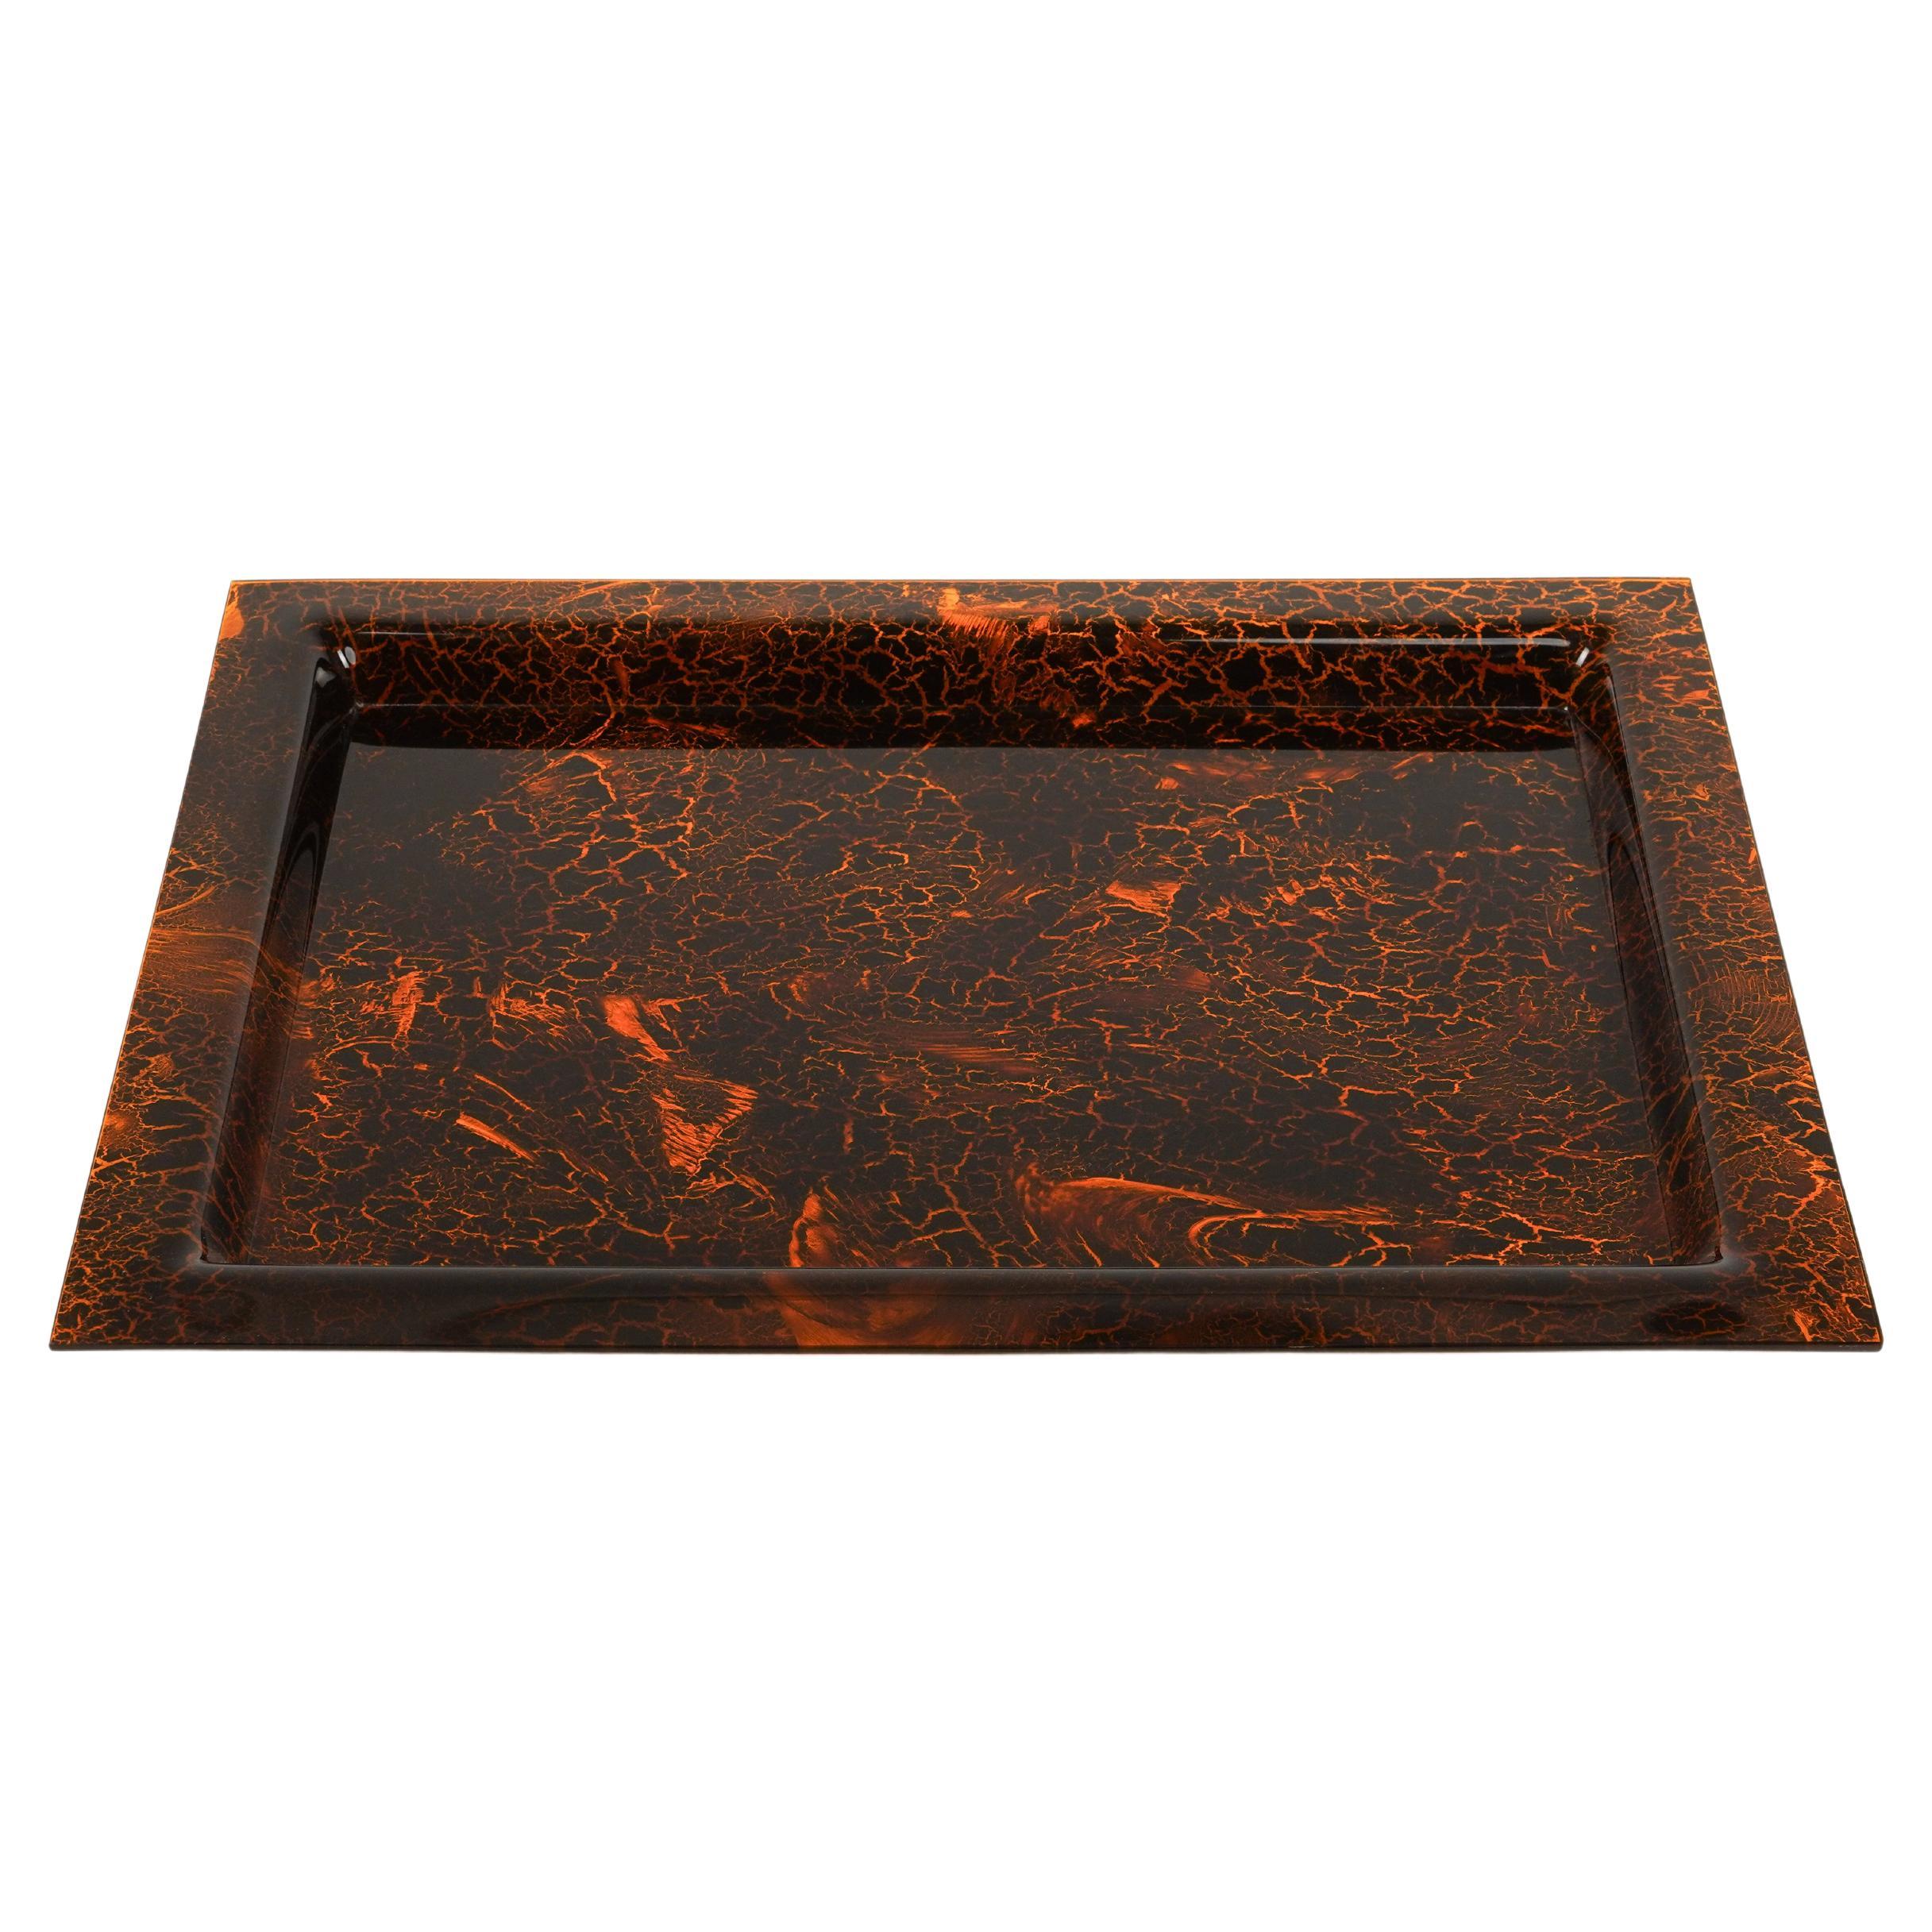 Serving Tray in Effect Tortoiseshell Lucite Christian Dior Style, Italy 1970s